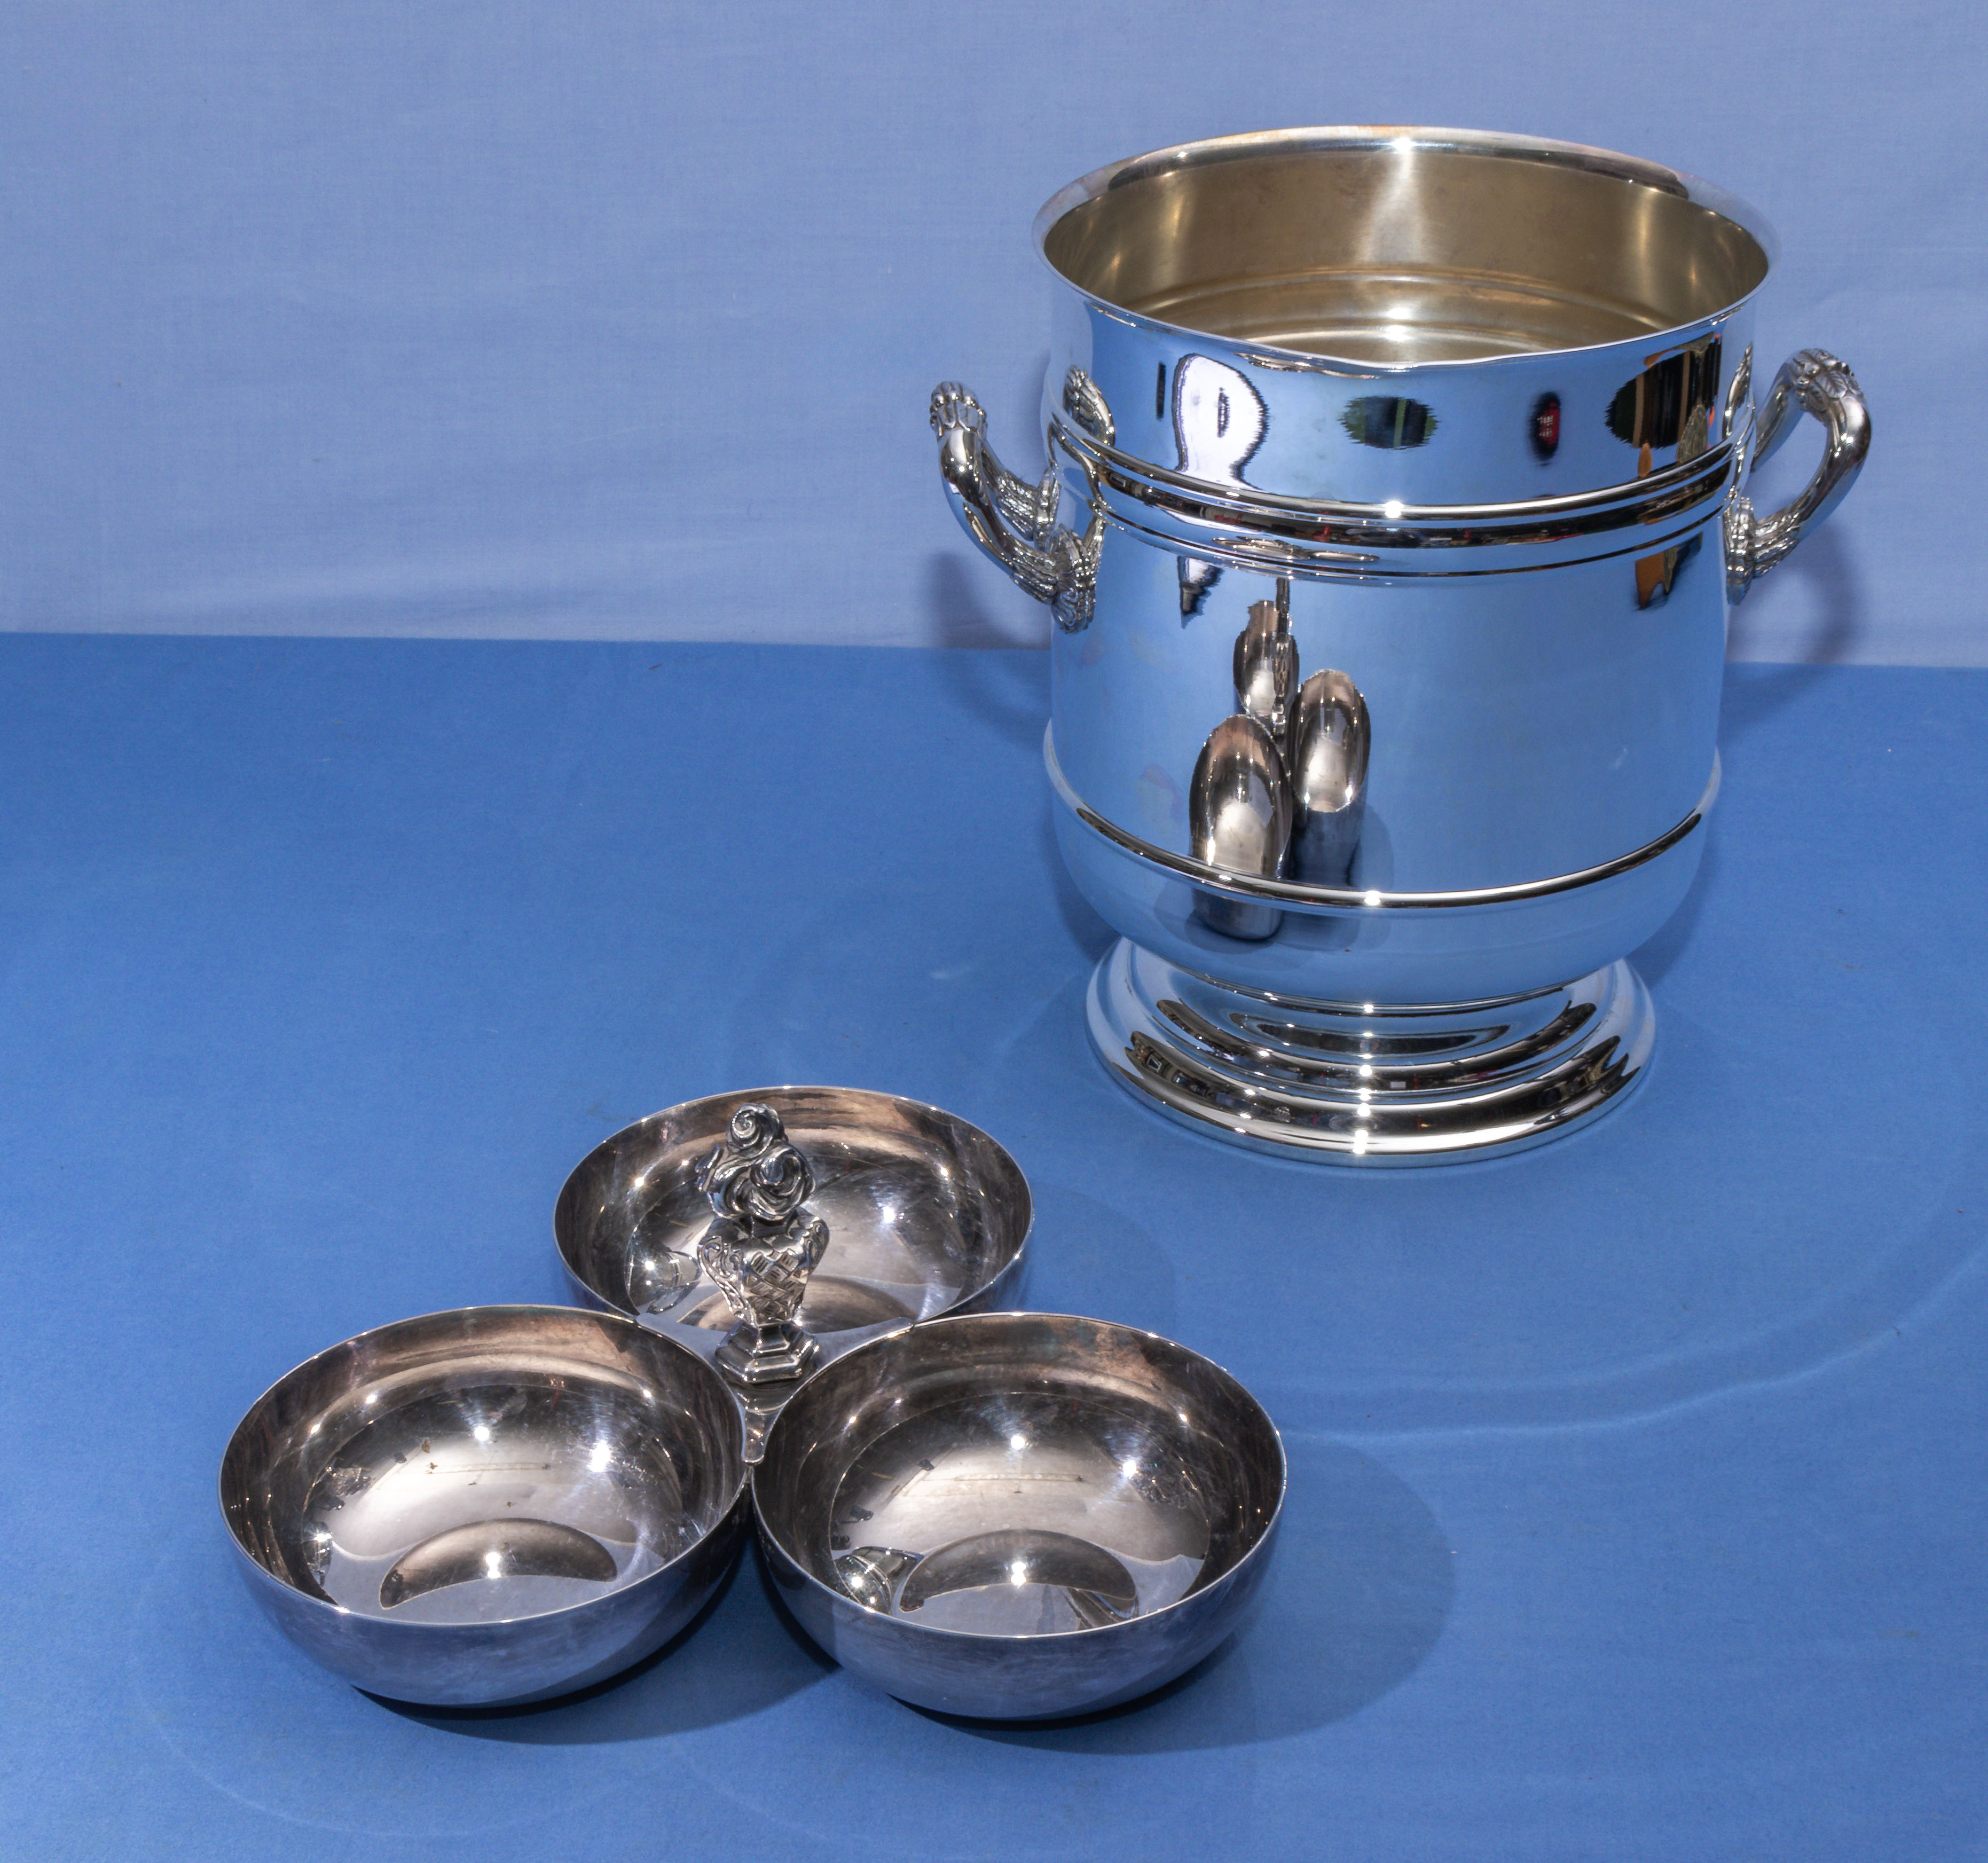 Christofle wine/champagne cooler together with a Christofle hors d’oeuvres dish